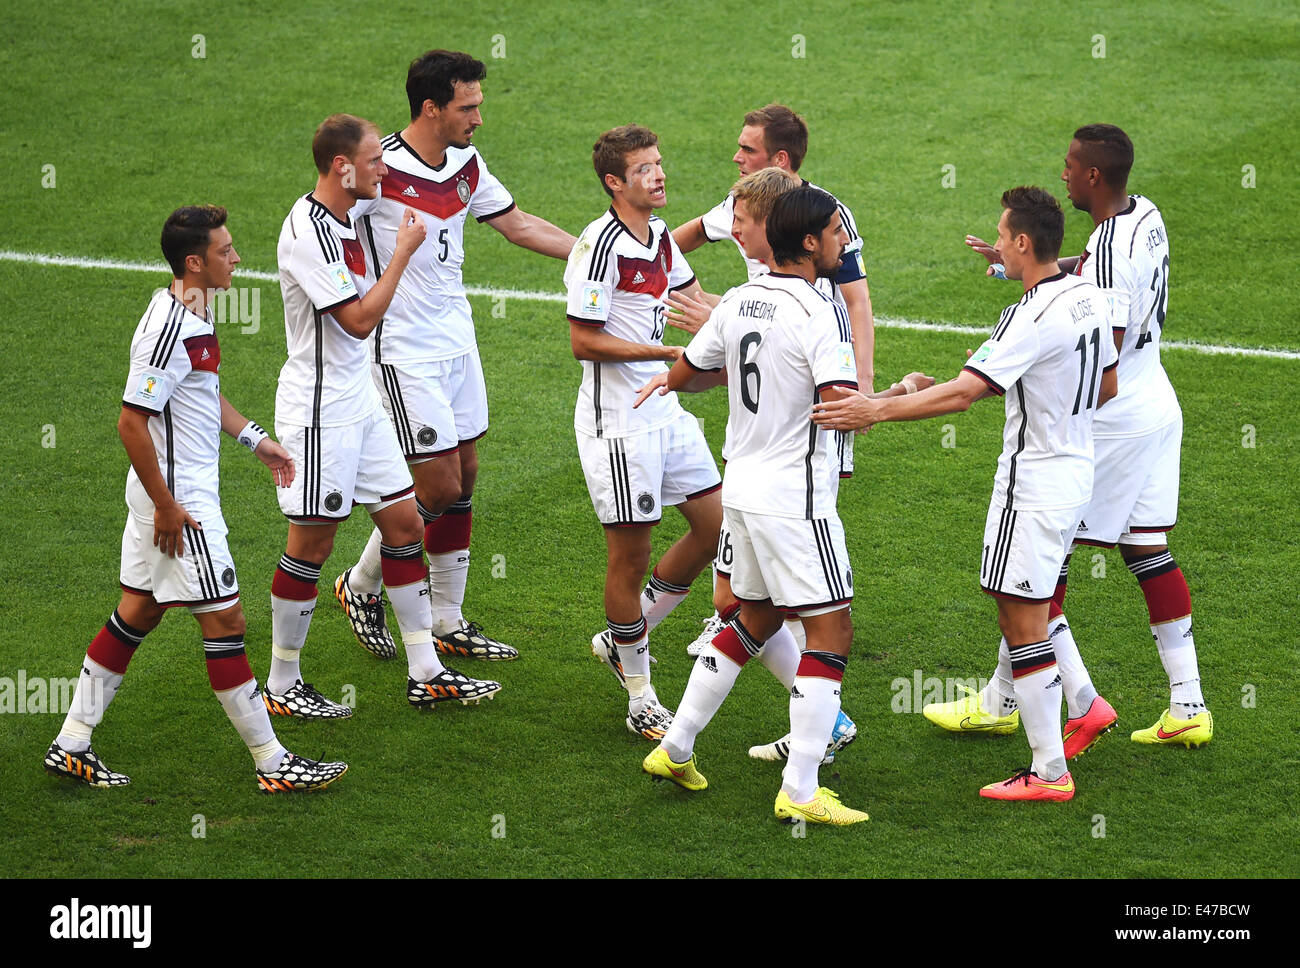 Rio de Janeiro, Brazil. 04th July, 2014. Mats Hummels (3-L) of Germany celebrates with team mates after scoring 0-1 goal during the FIFA World Cup 2014 quarter final soccer match between France and Germany at Estadio do Maracana in Rio de Janeiro, Brazil, 04 July 2014. Photo: Marcus Brandt/dpa/Alamy Live News Stock Photo